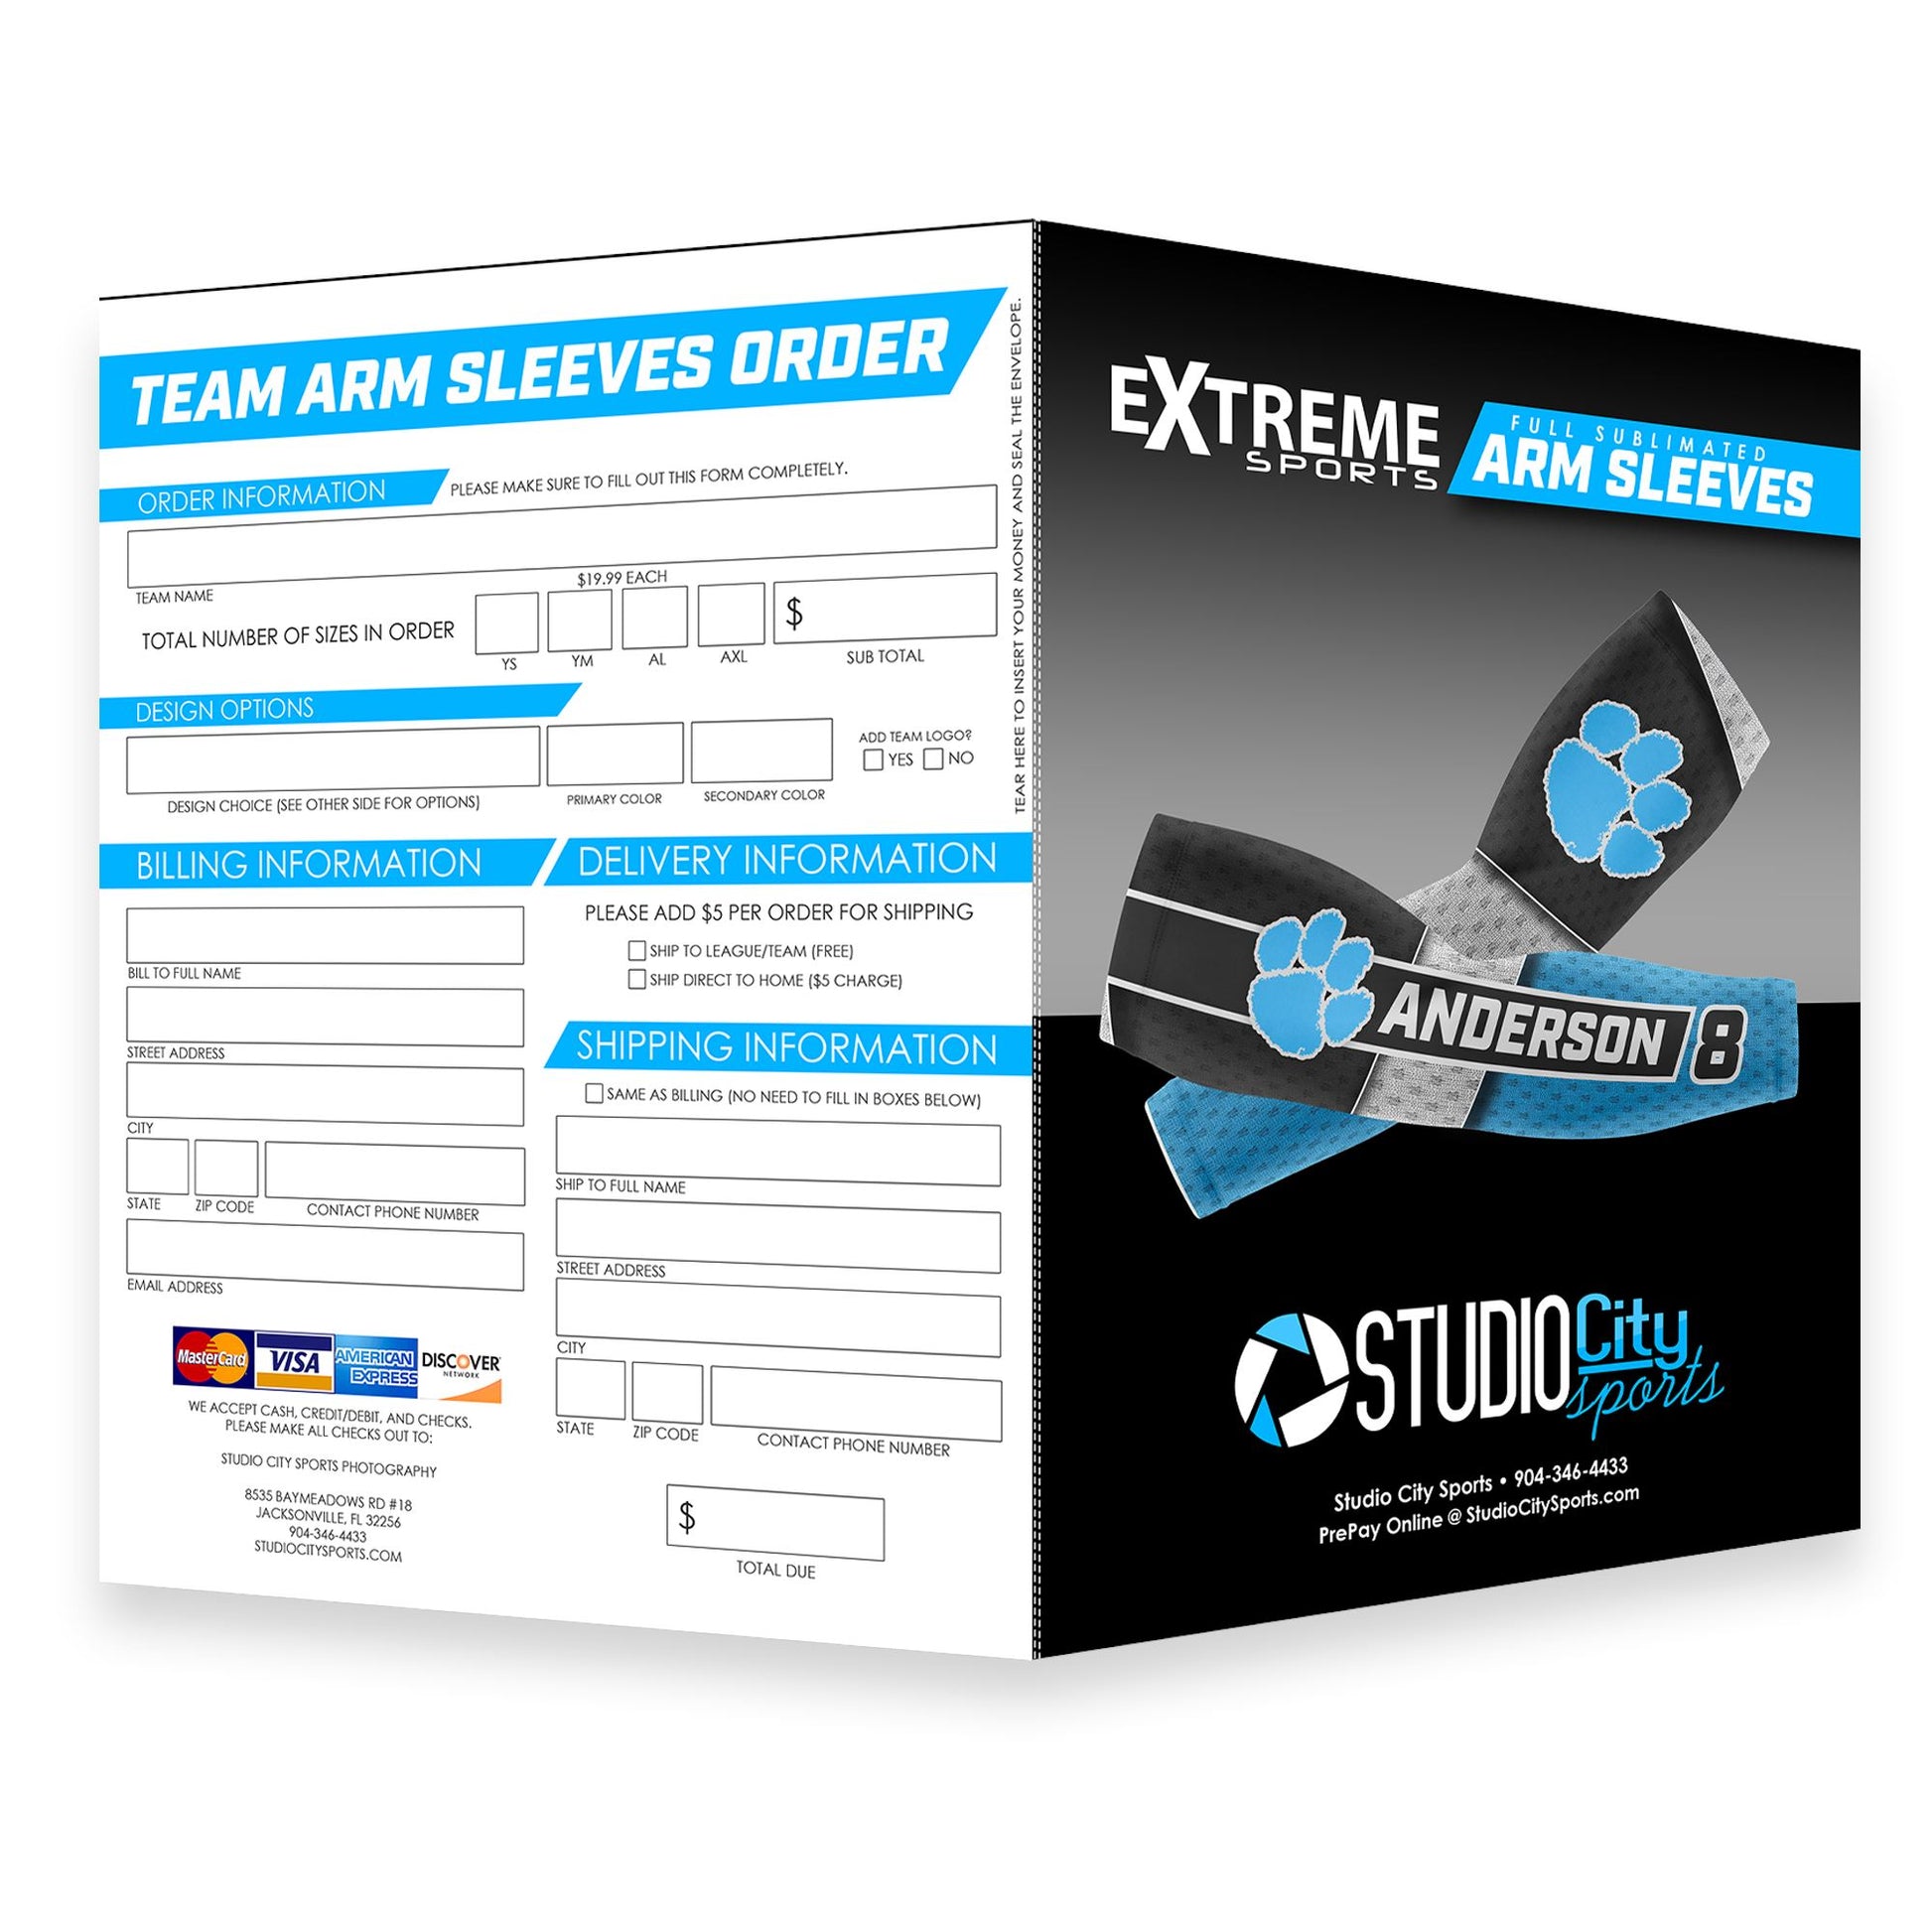 01 Arm Sleeve Marketing - FULL COLLECTION-Photoshop Template - PSMGraphix